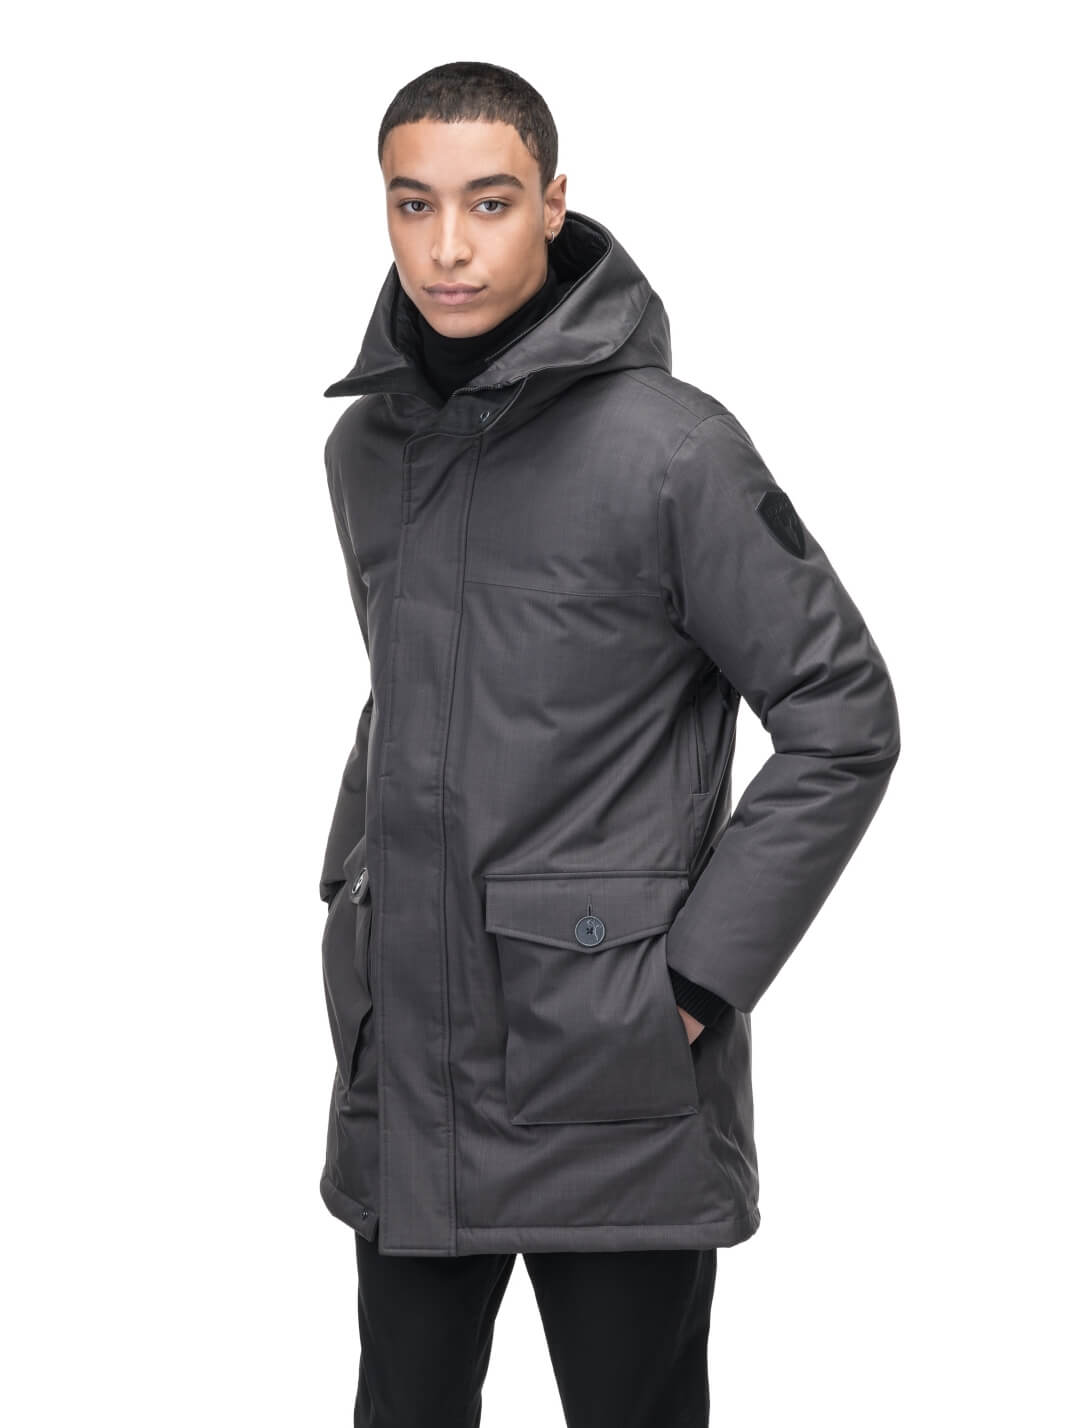 Yves Furless Men's Parka in thigh length, Canadian white duck down insulation, non-removable down-filled hood, flap pockets at waist, centre-front two-way zipper with magnetic wind flap, and elastic ribbed cuffs, in CH Steel Grey